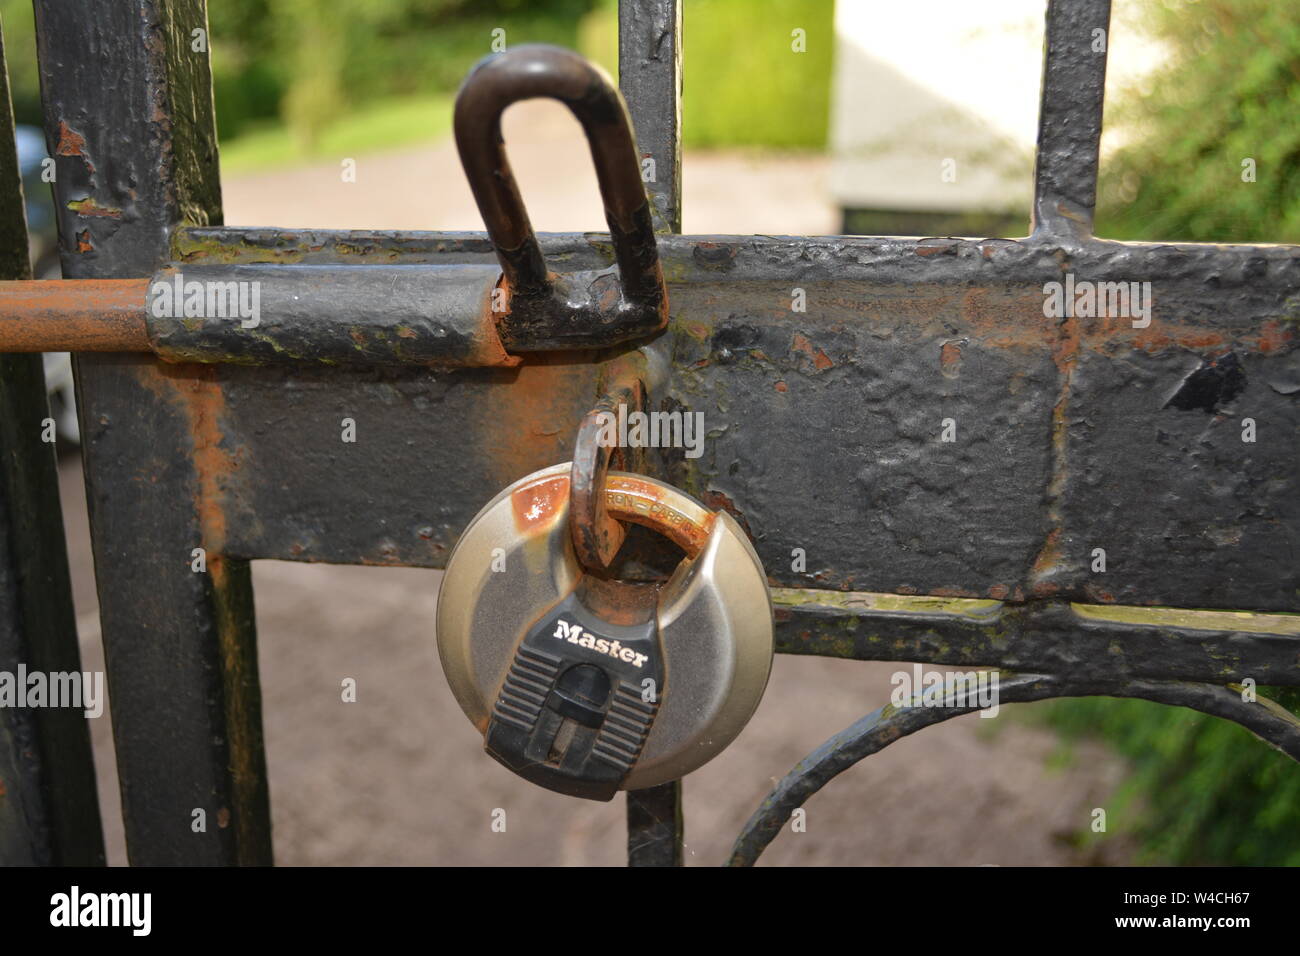 Circular Master security lock on black painted rusting wrought iron fence with open latch re home house security Stock Photo